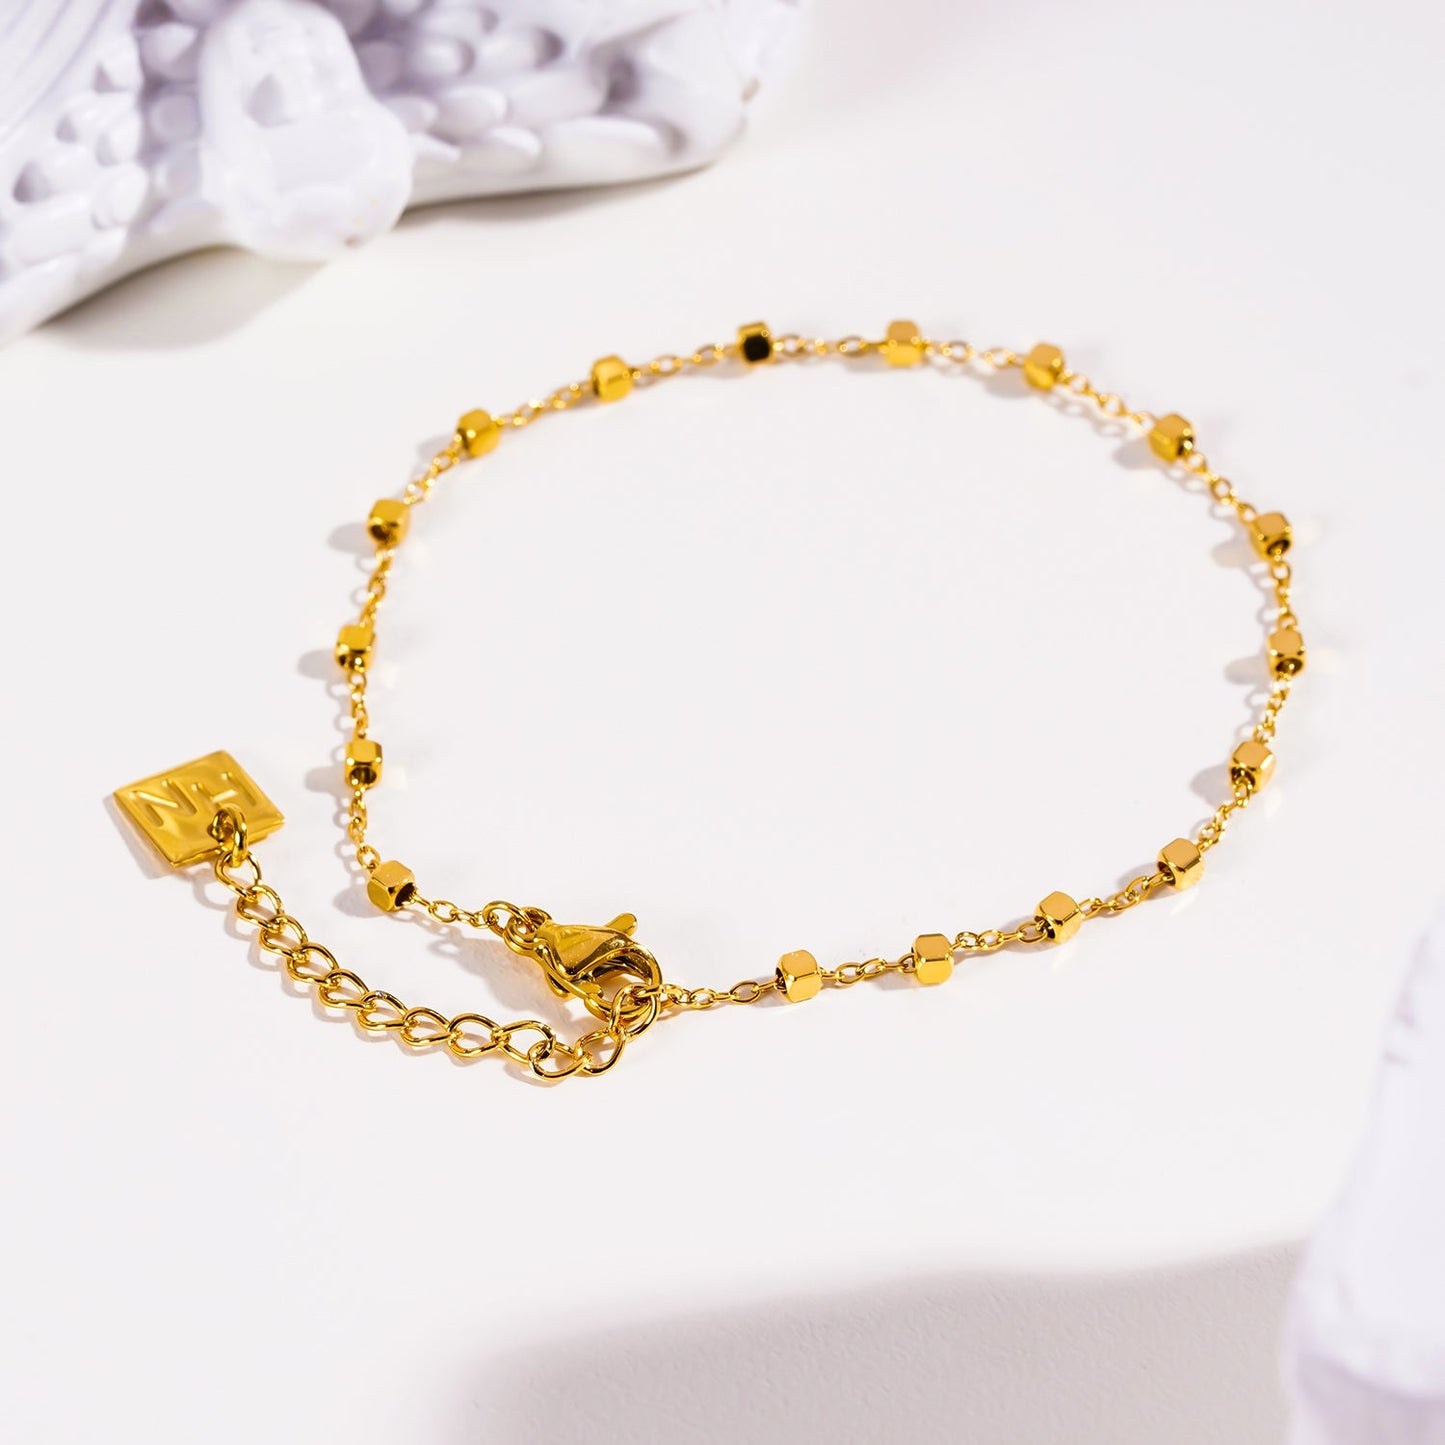 Style: DEMELZA: Essential Daily Bracelet with Delicate Square Beads.